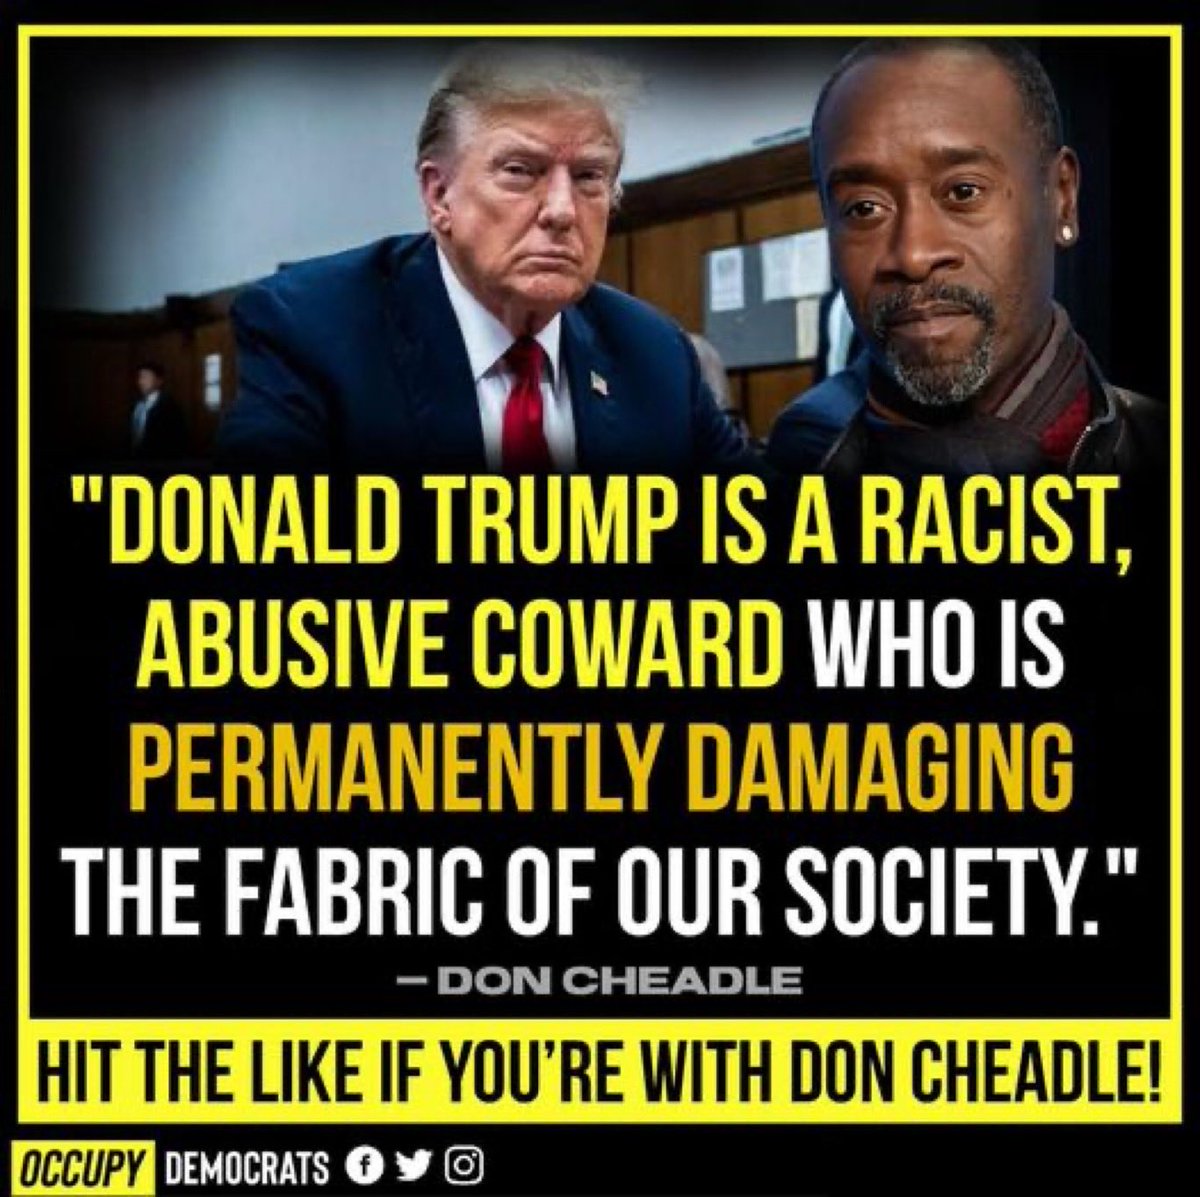 This is correct. From saying there were “very fine people” on both sides in Charlottesville, to calling immigrants ‘filth and vermin who poison the blood of America’ - Donald Trump is an avowed racist who is unfit to serve in the presidency. Stop him to save America. #FreshUnity